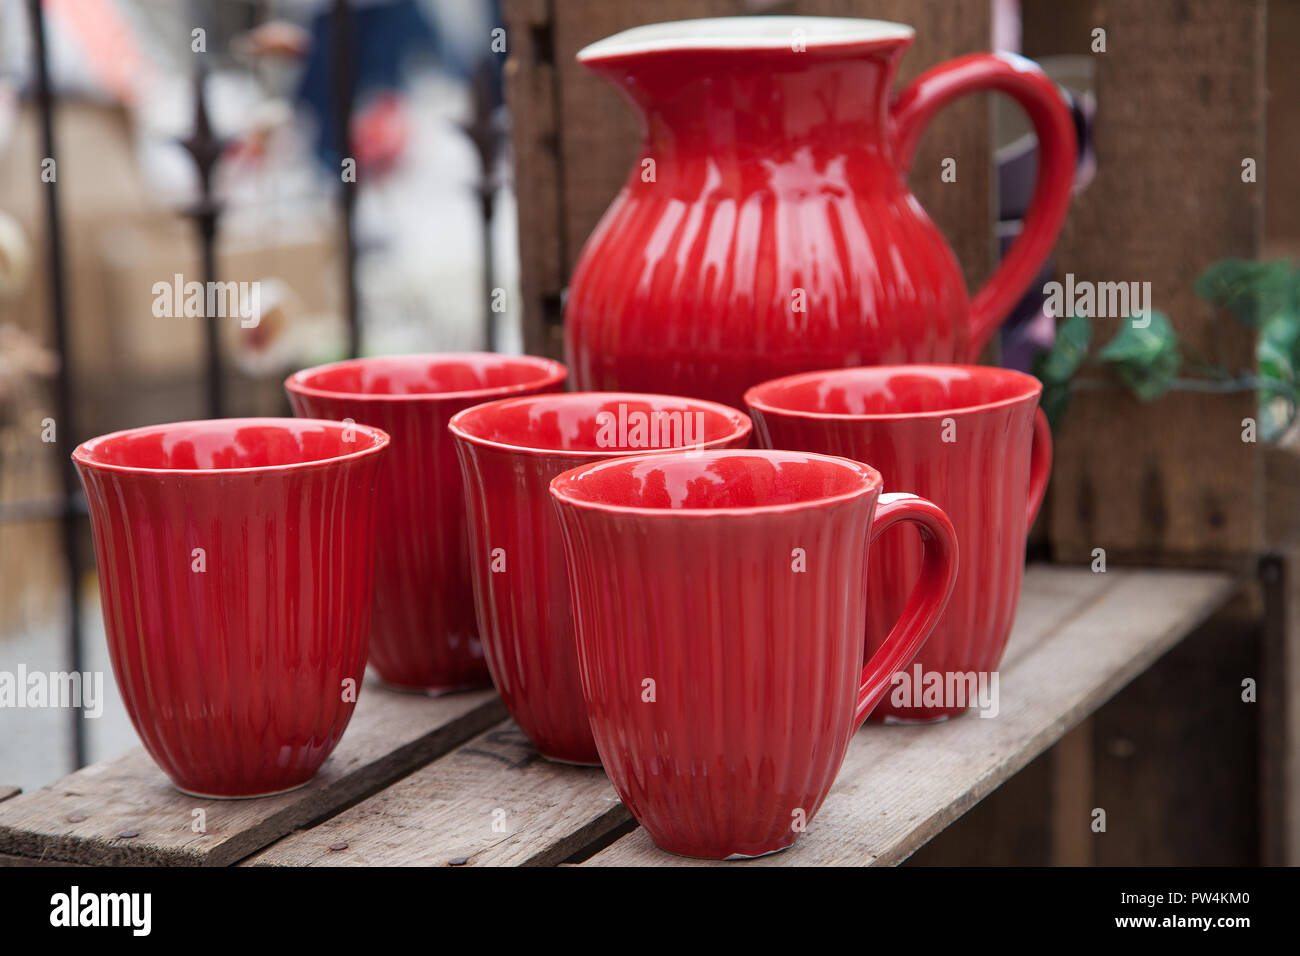 Red porcelain jug and mugs Stock Photo